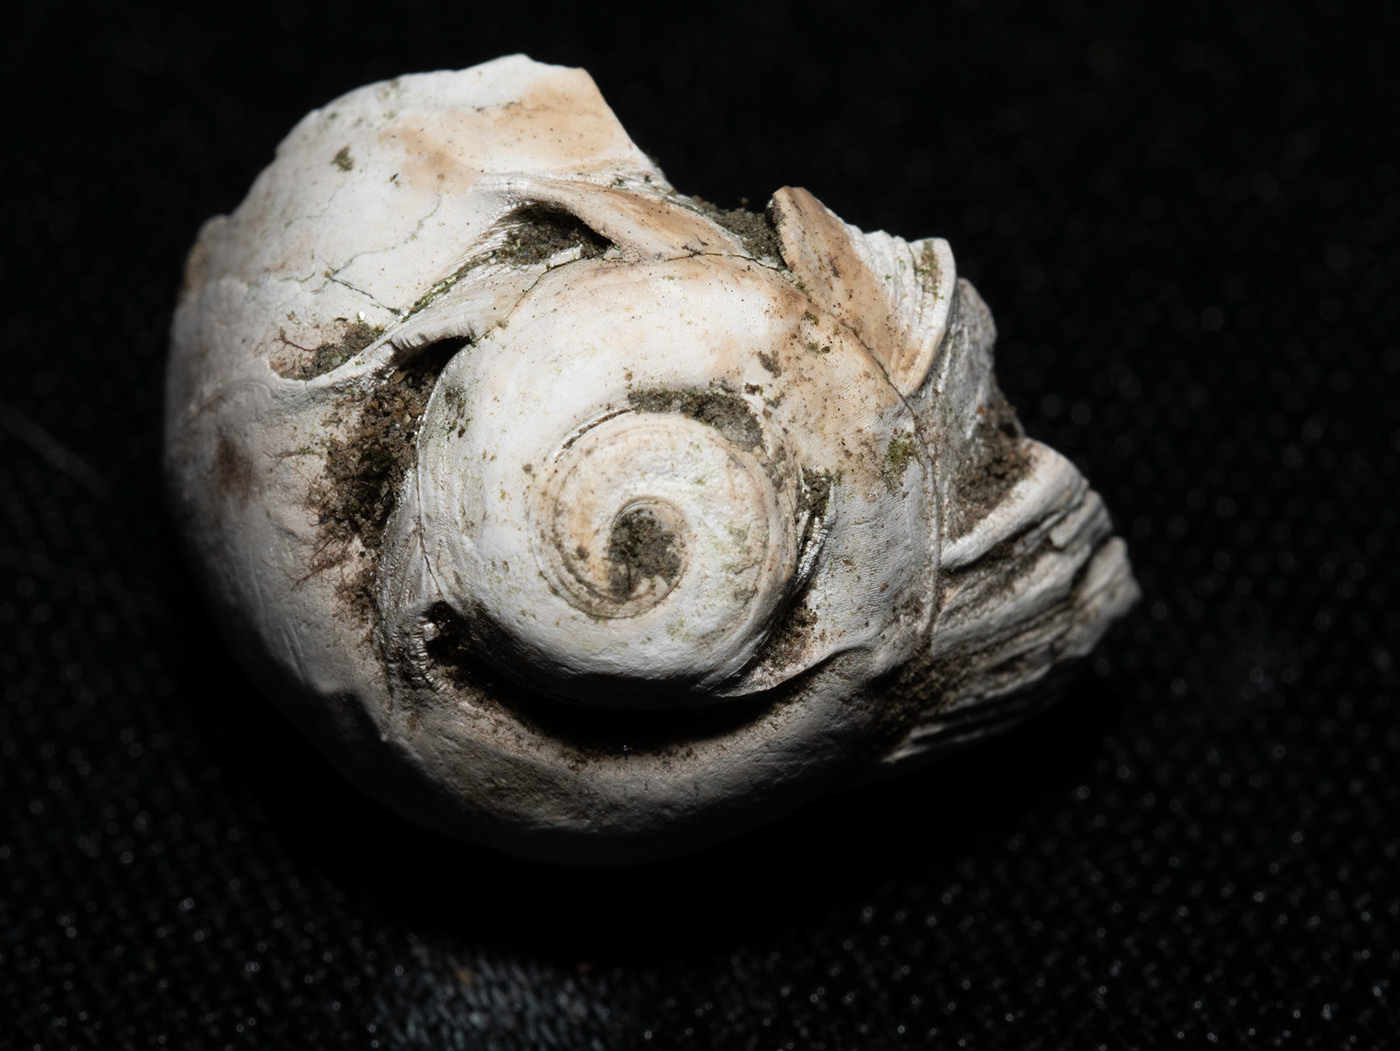 Fossil Nature Macro Photography snail